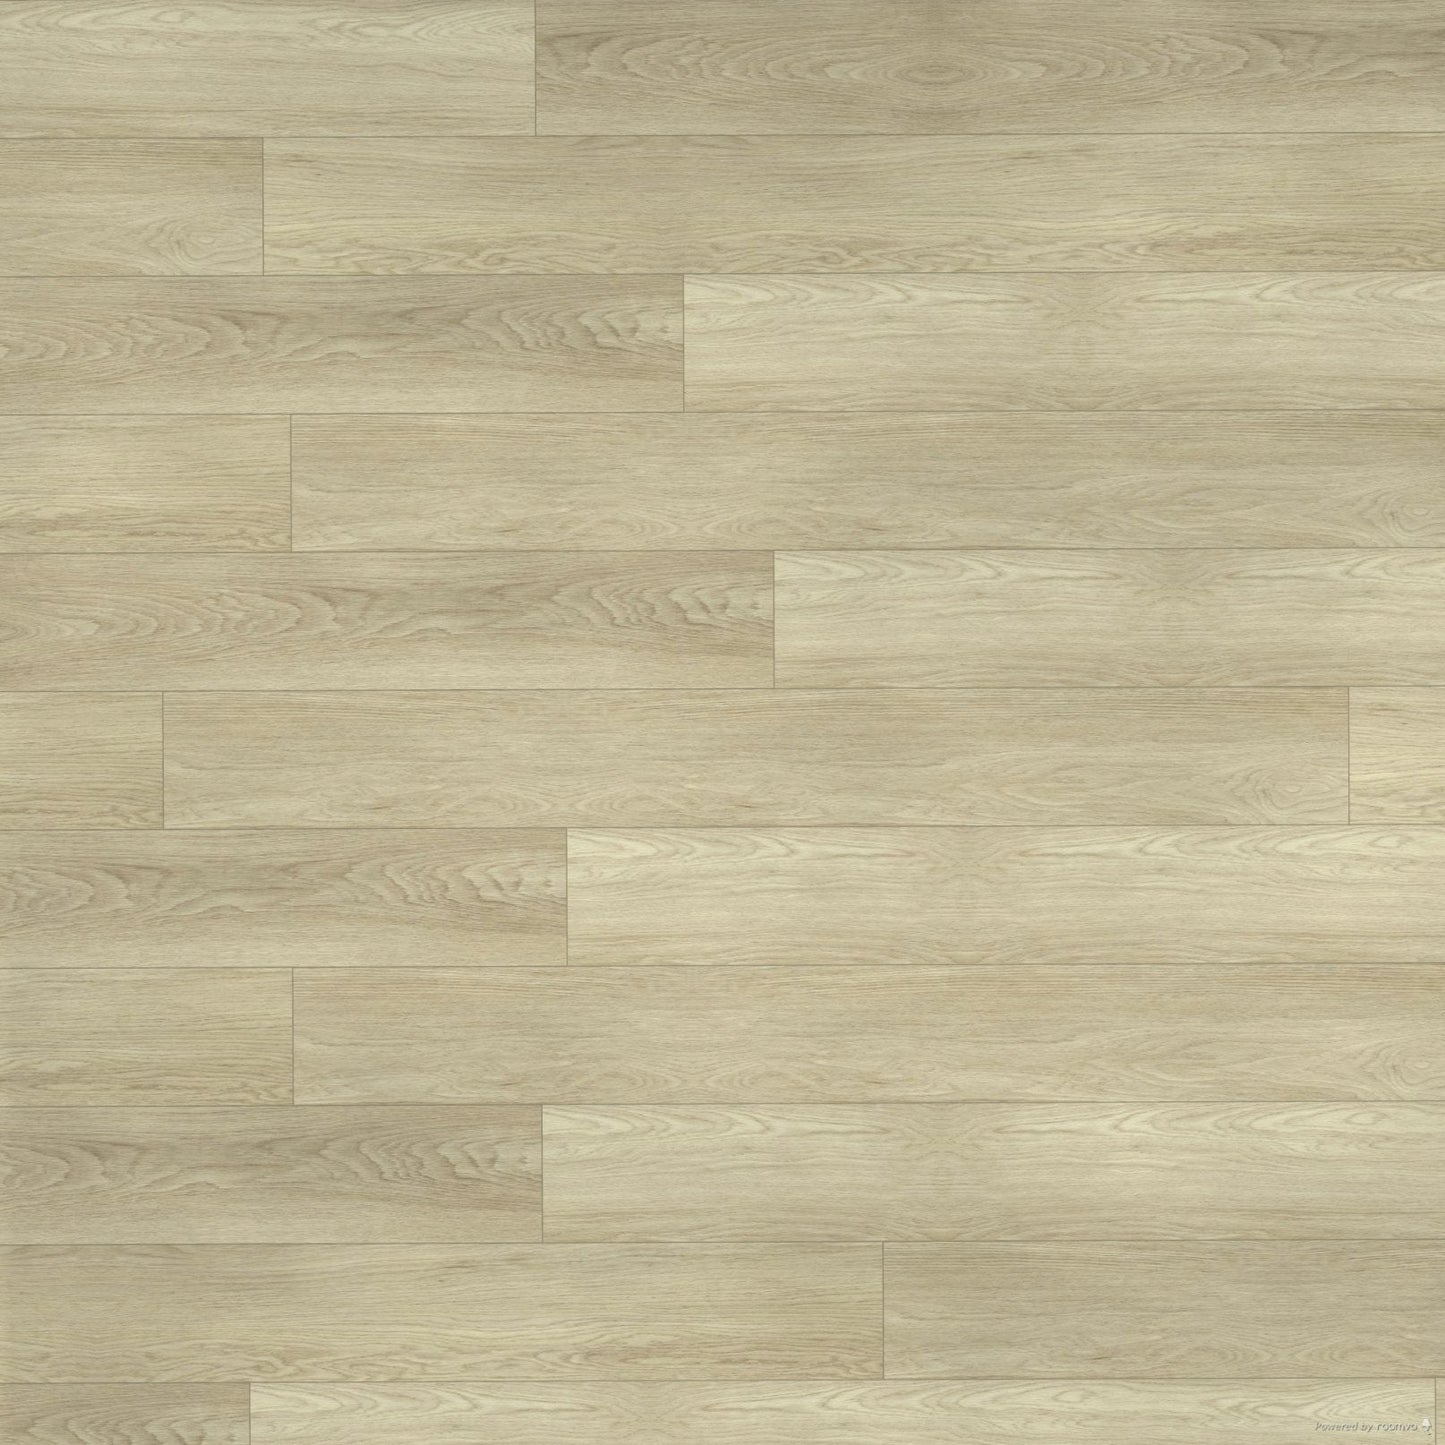 Select Natural Hewn Stoneform luxury flooring plank swatch